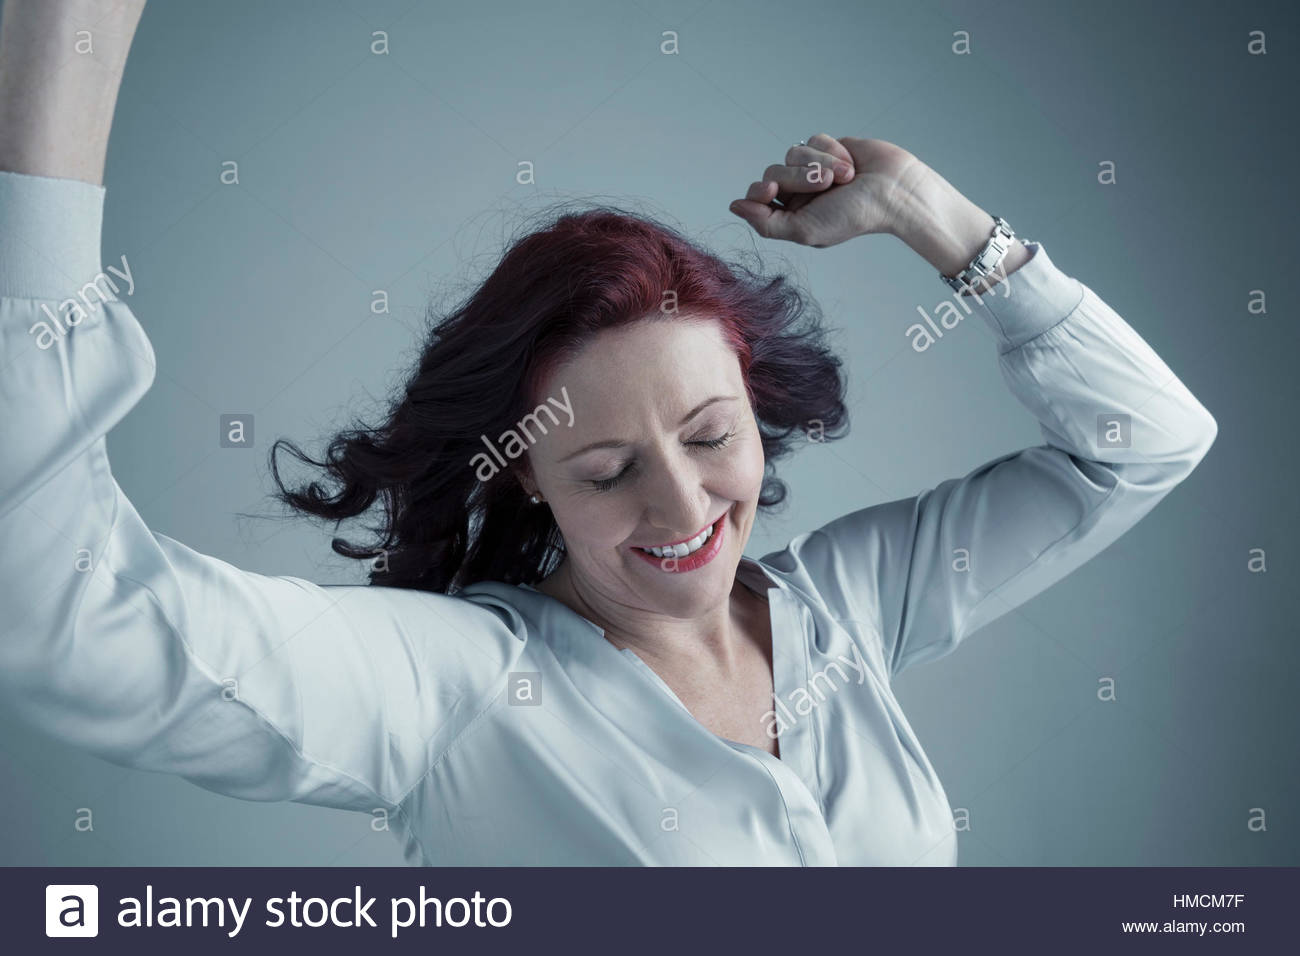 Portrait carefree Caucasian mature woman with burgundy red hair dancing with arms raised and eyes closed Stock Photo